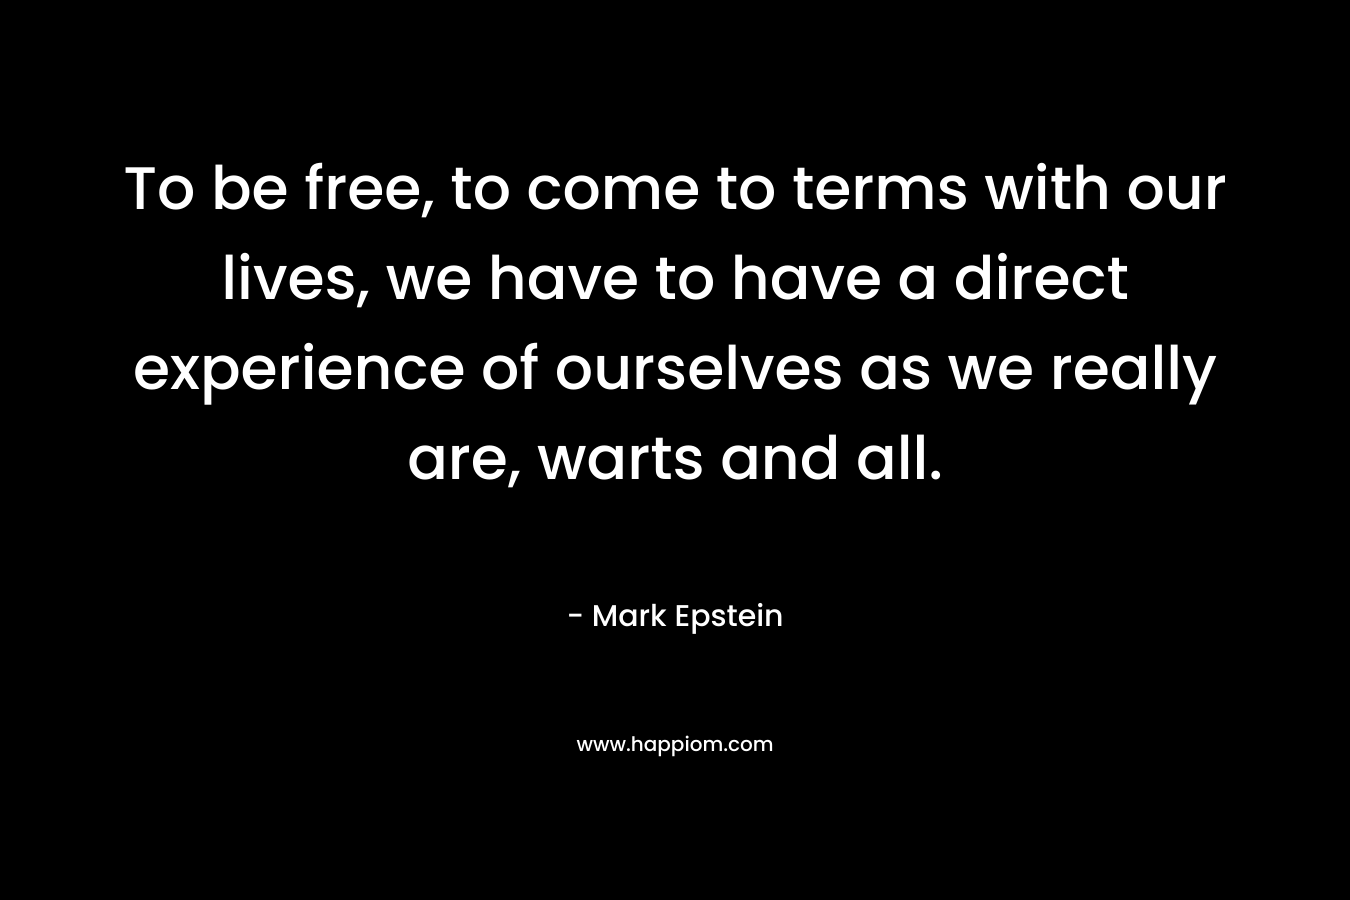 To be free, to come to terms with our lives, we have to have a direct experience of ourselves as we really are, warts and all. – Mark Epstein